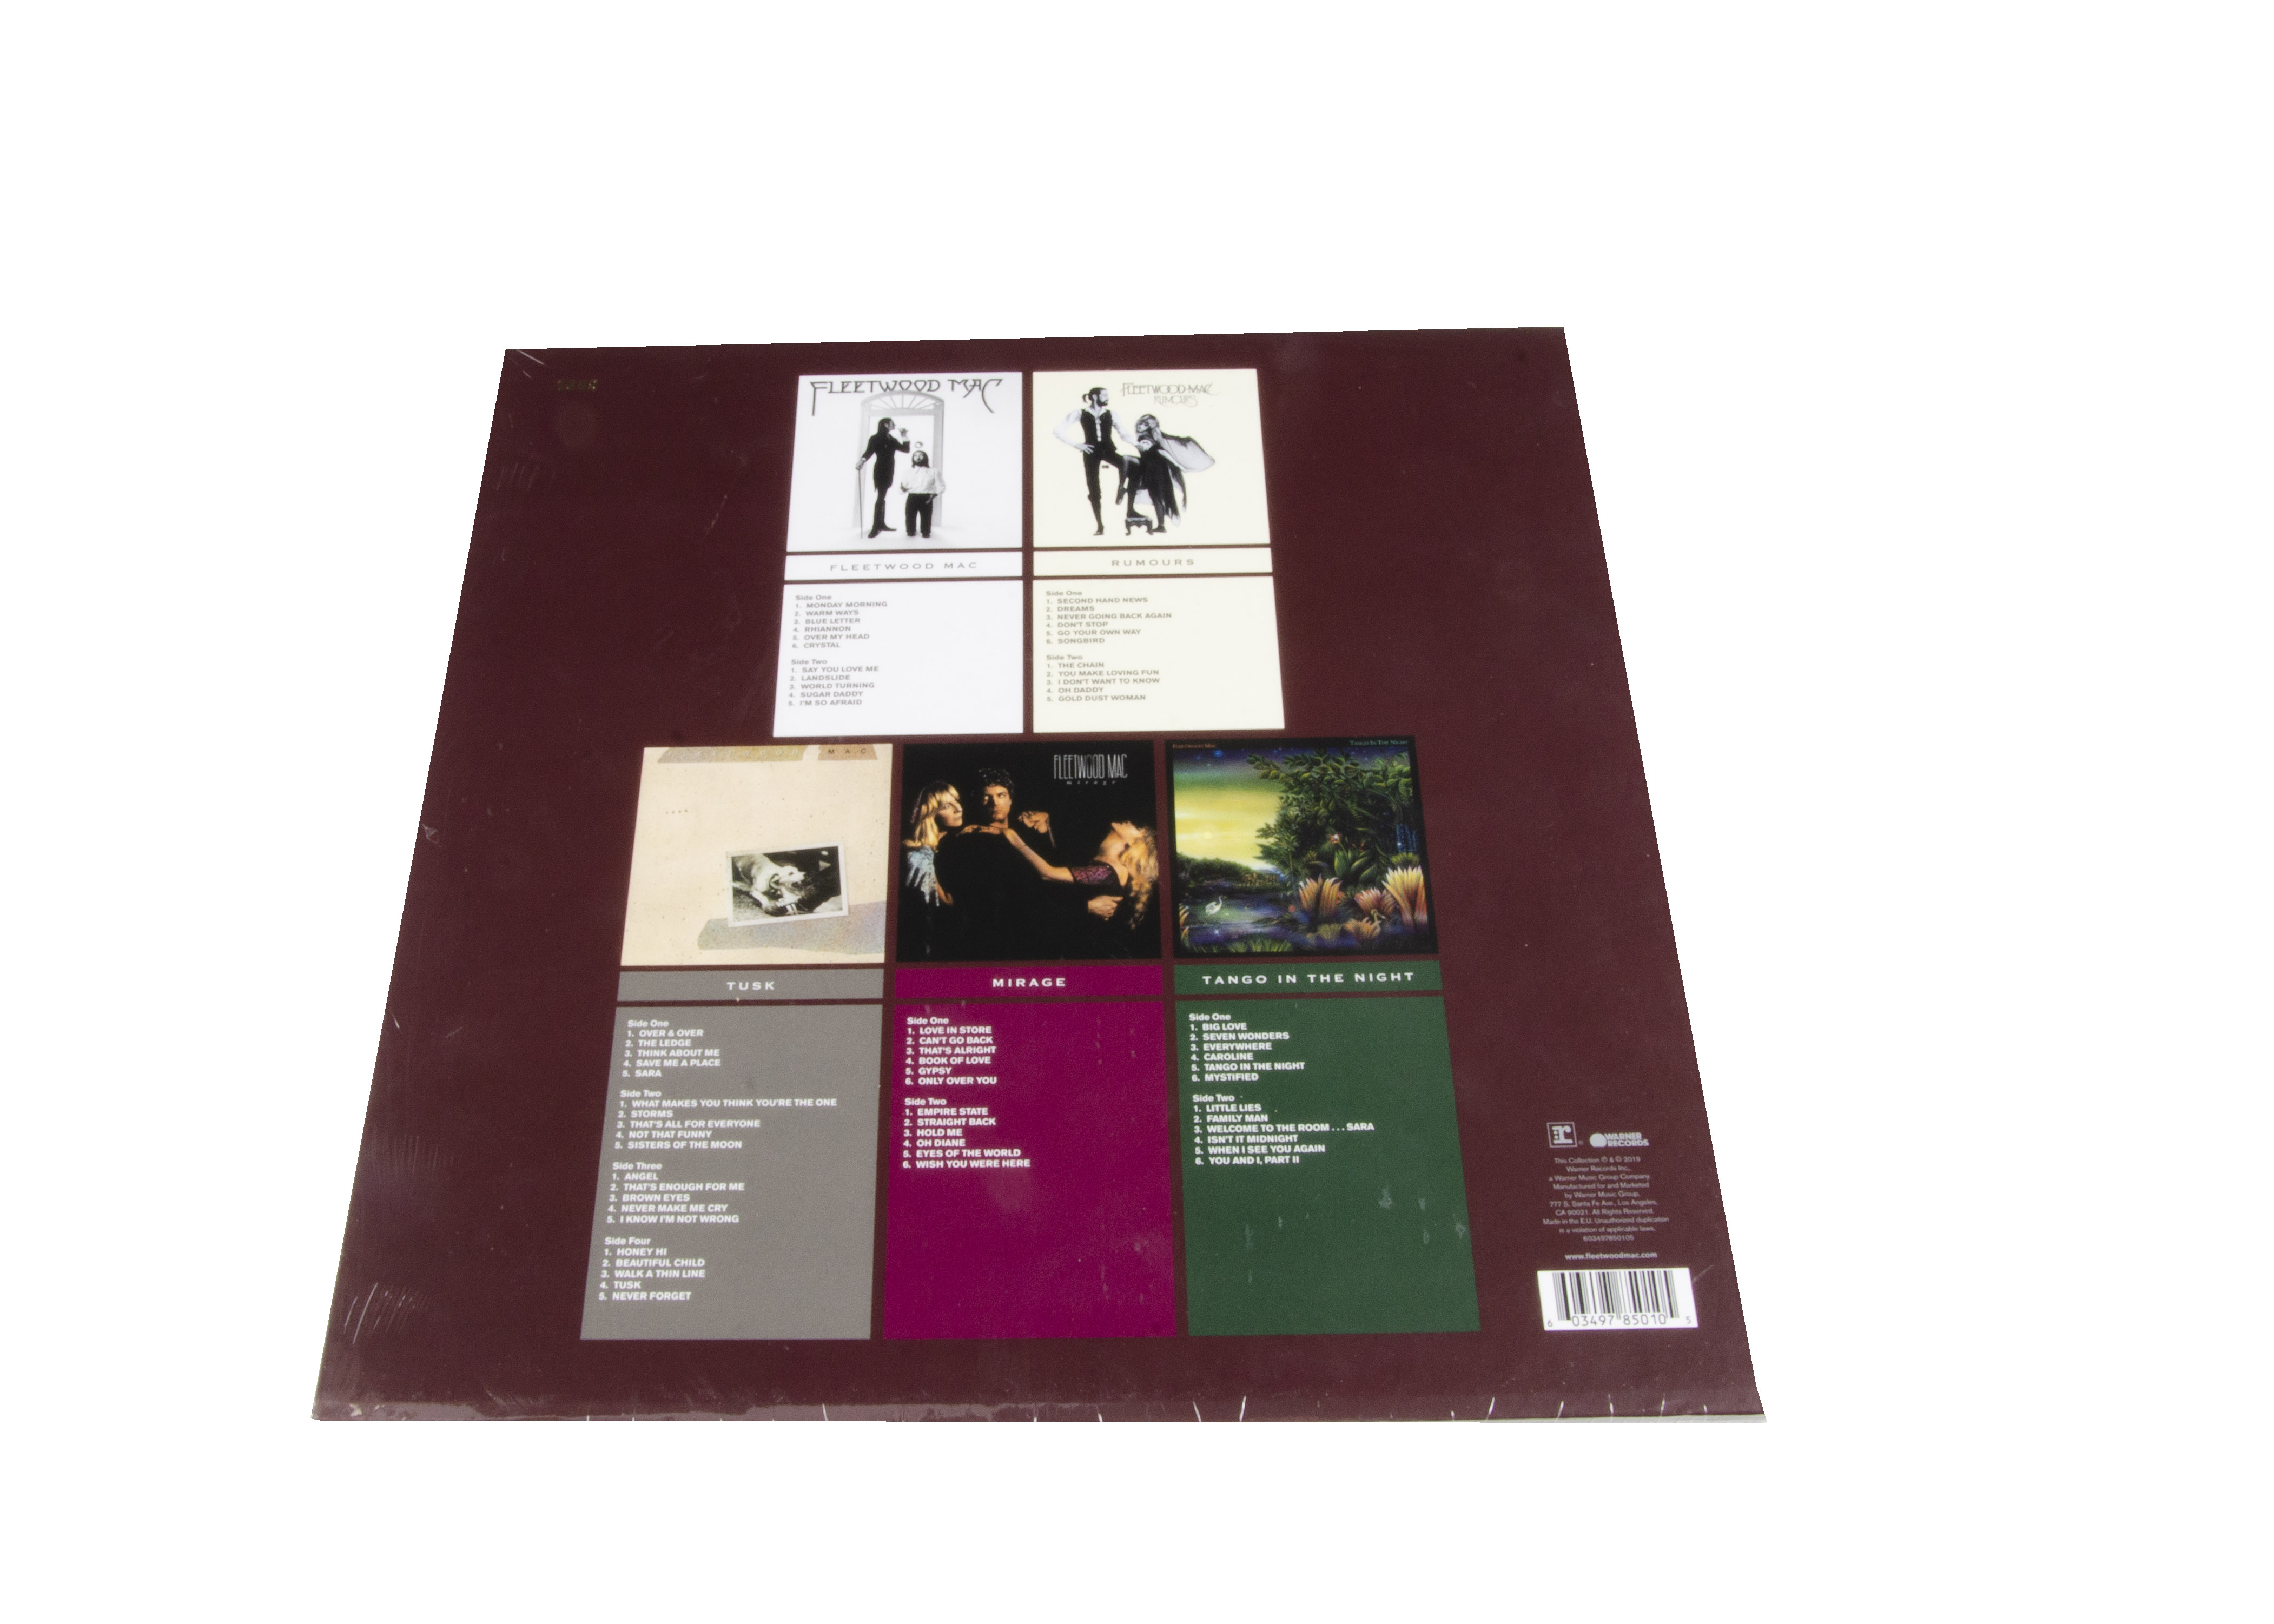 Fleetwood Mac Box Set, 1975 to 1987 - Limited Edition Numbered Box Set released 2019 on Reprise / - Image 2 of 2